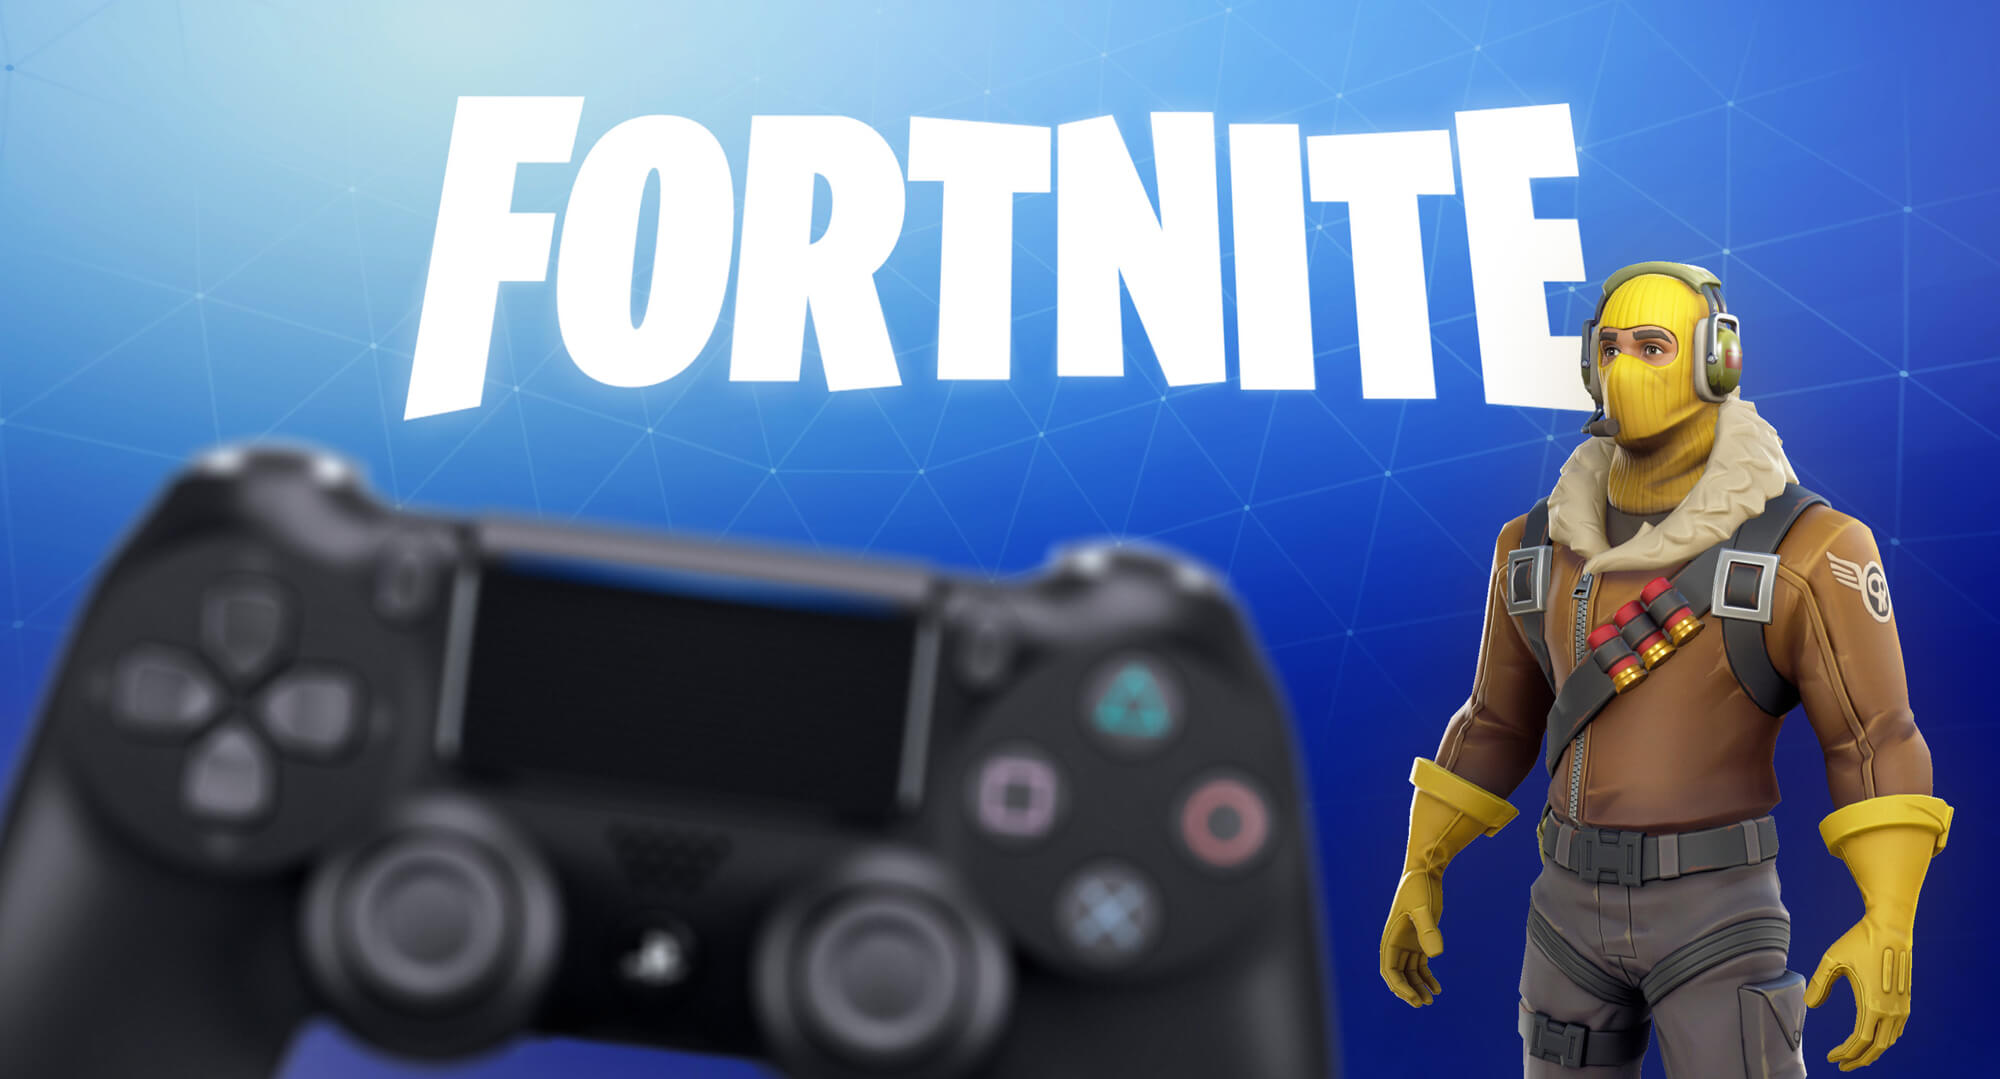 Fortnite video game avatar and Playstation controller